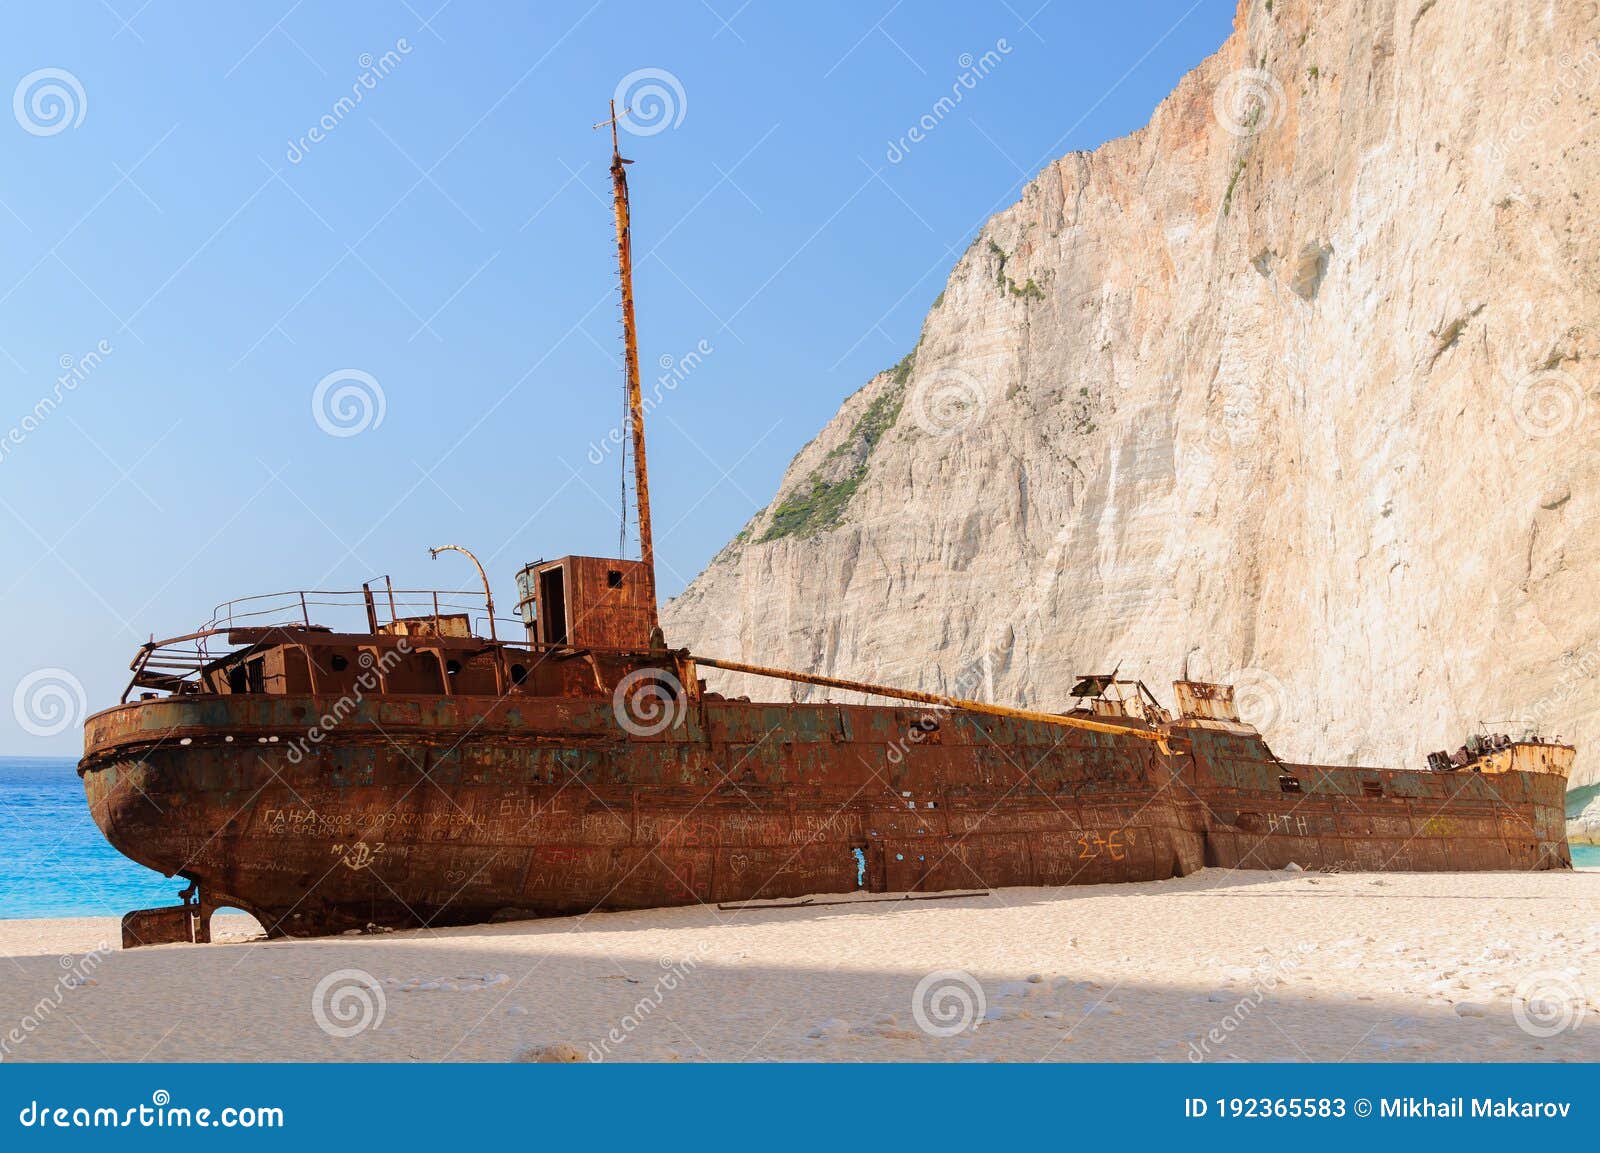 shipwreck beach with remainder of wrecked ship on zakynthos island